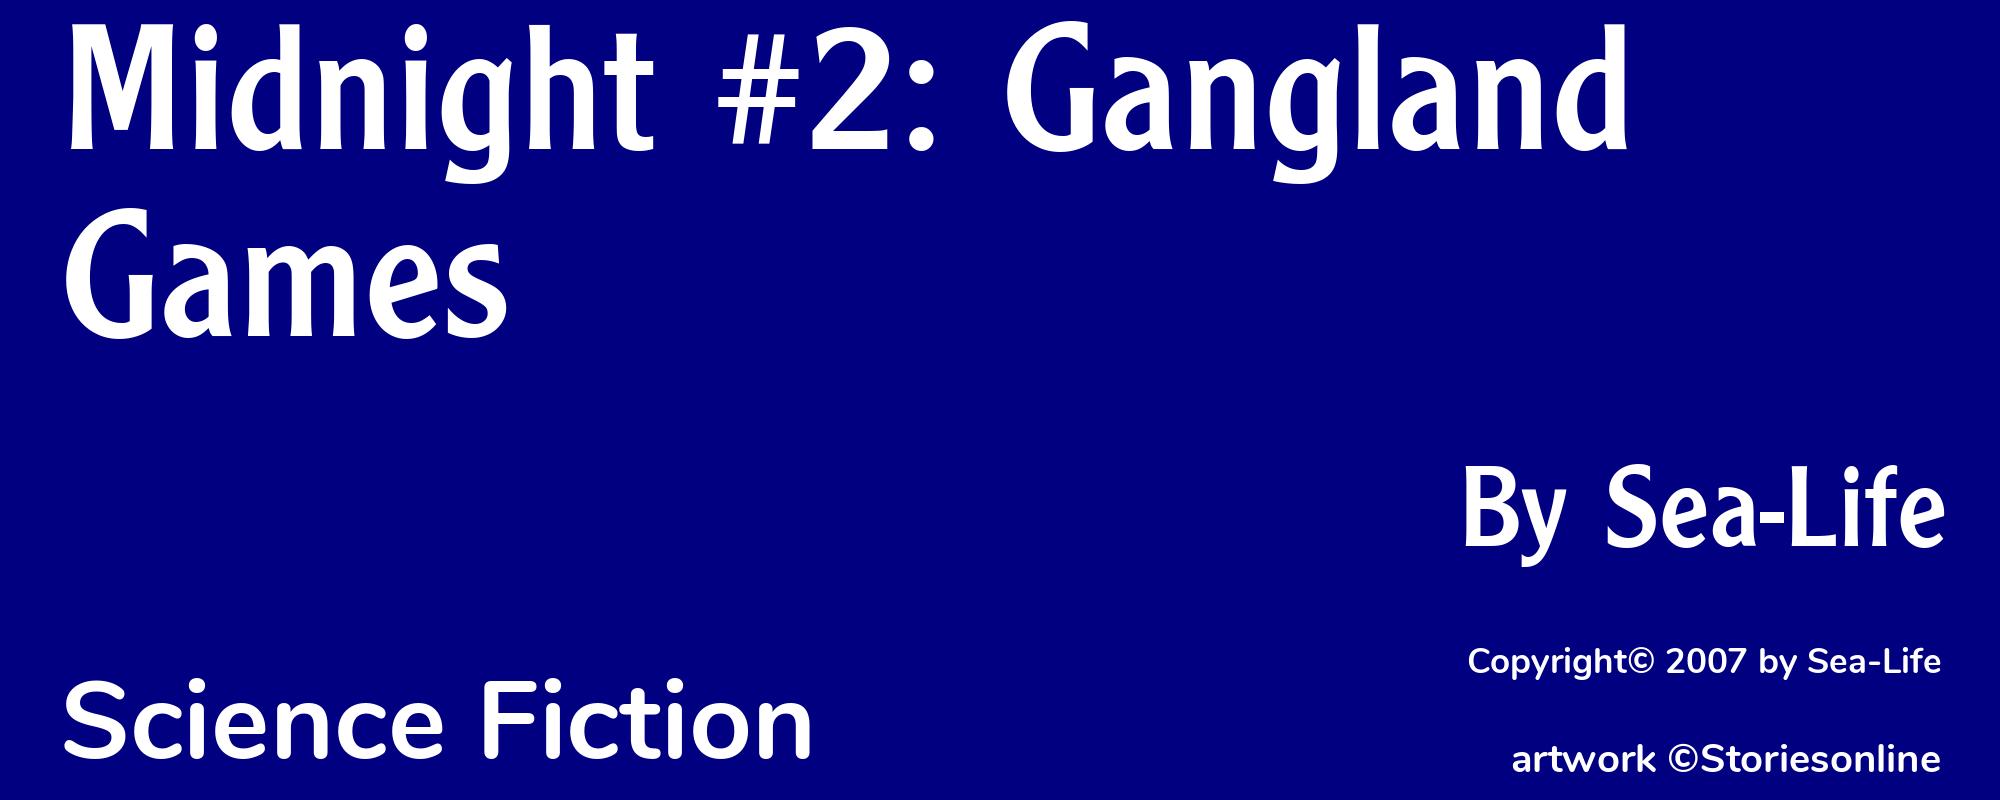 Midnight #2: Gangland Games - Cover